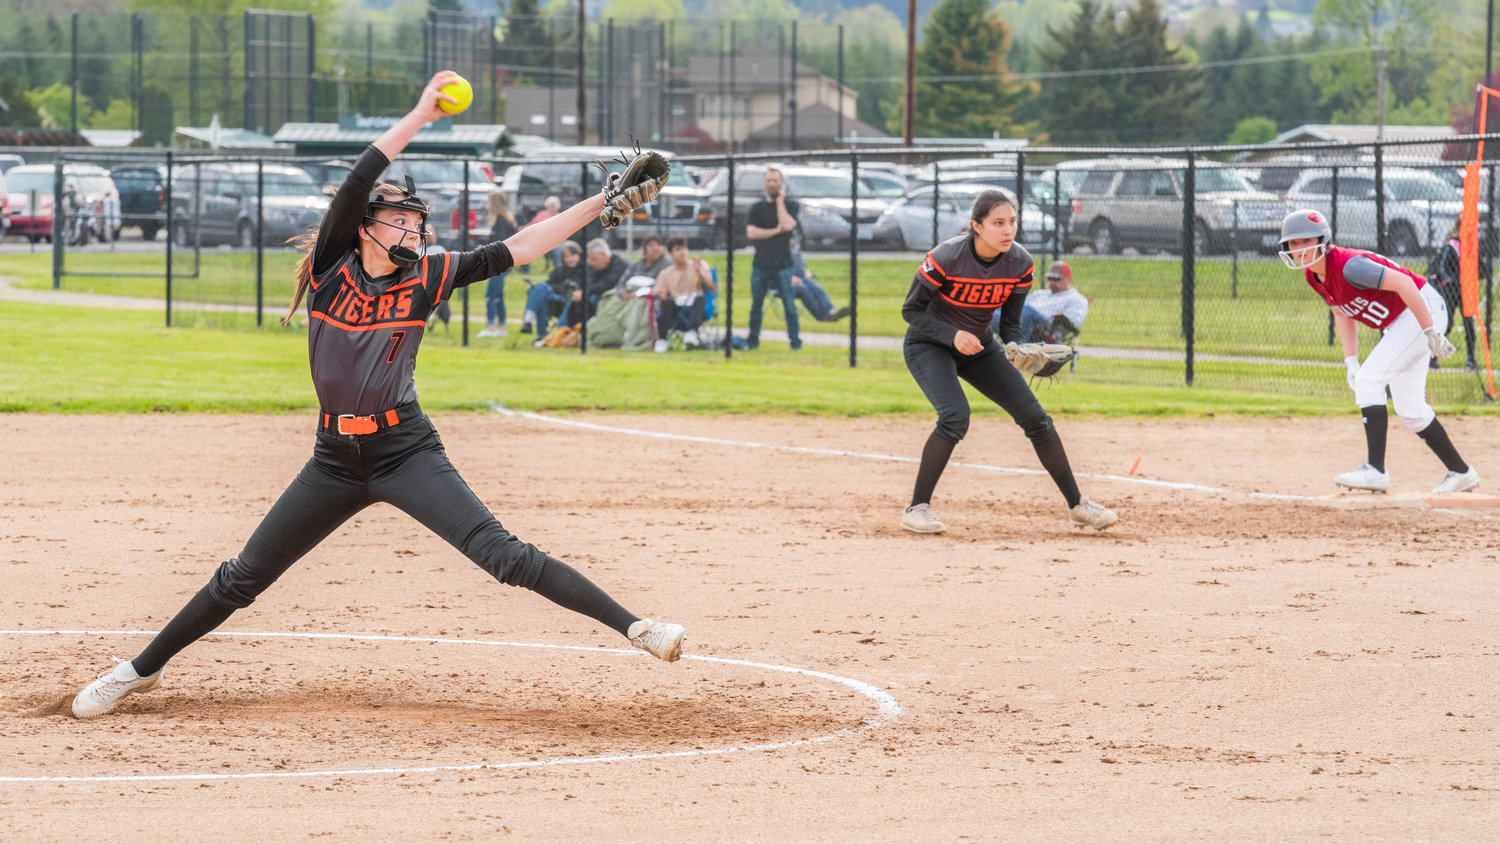 Centralia’s Peyton Smith (7) streches out to throw a pitch during a game against W.F. West on Wednesday.